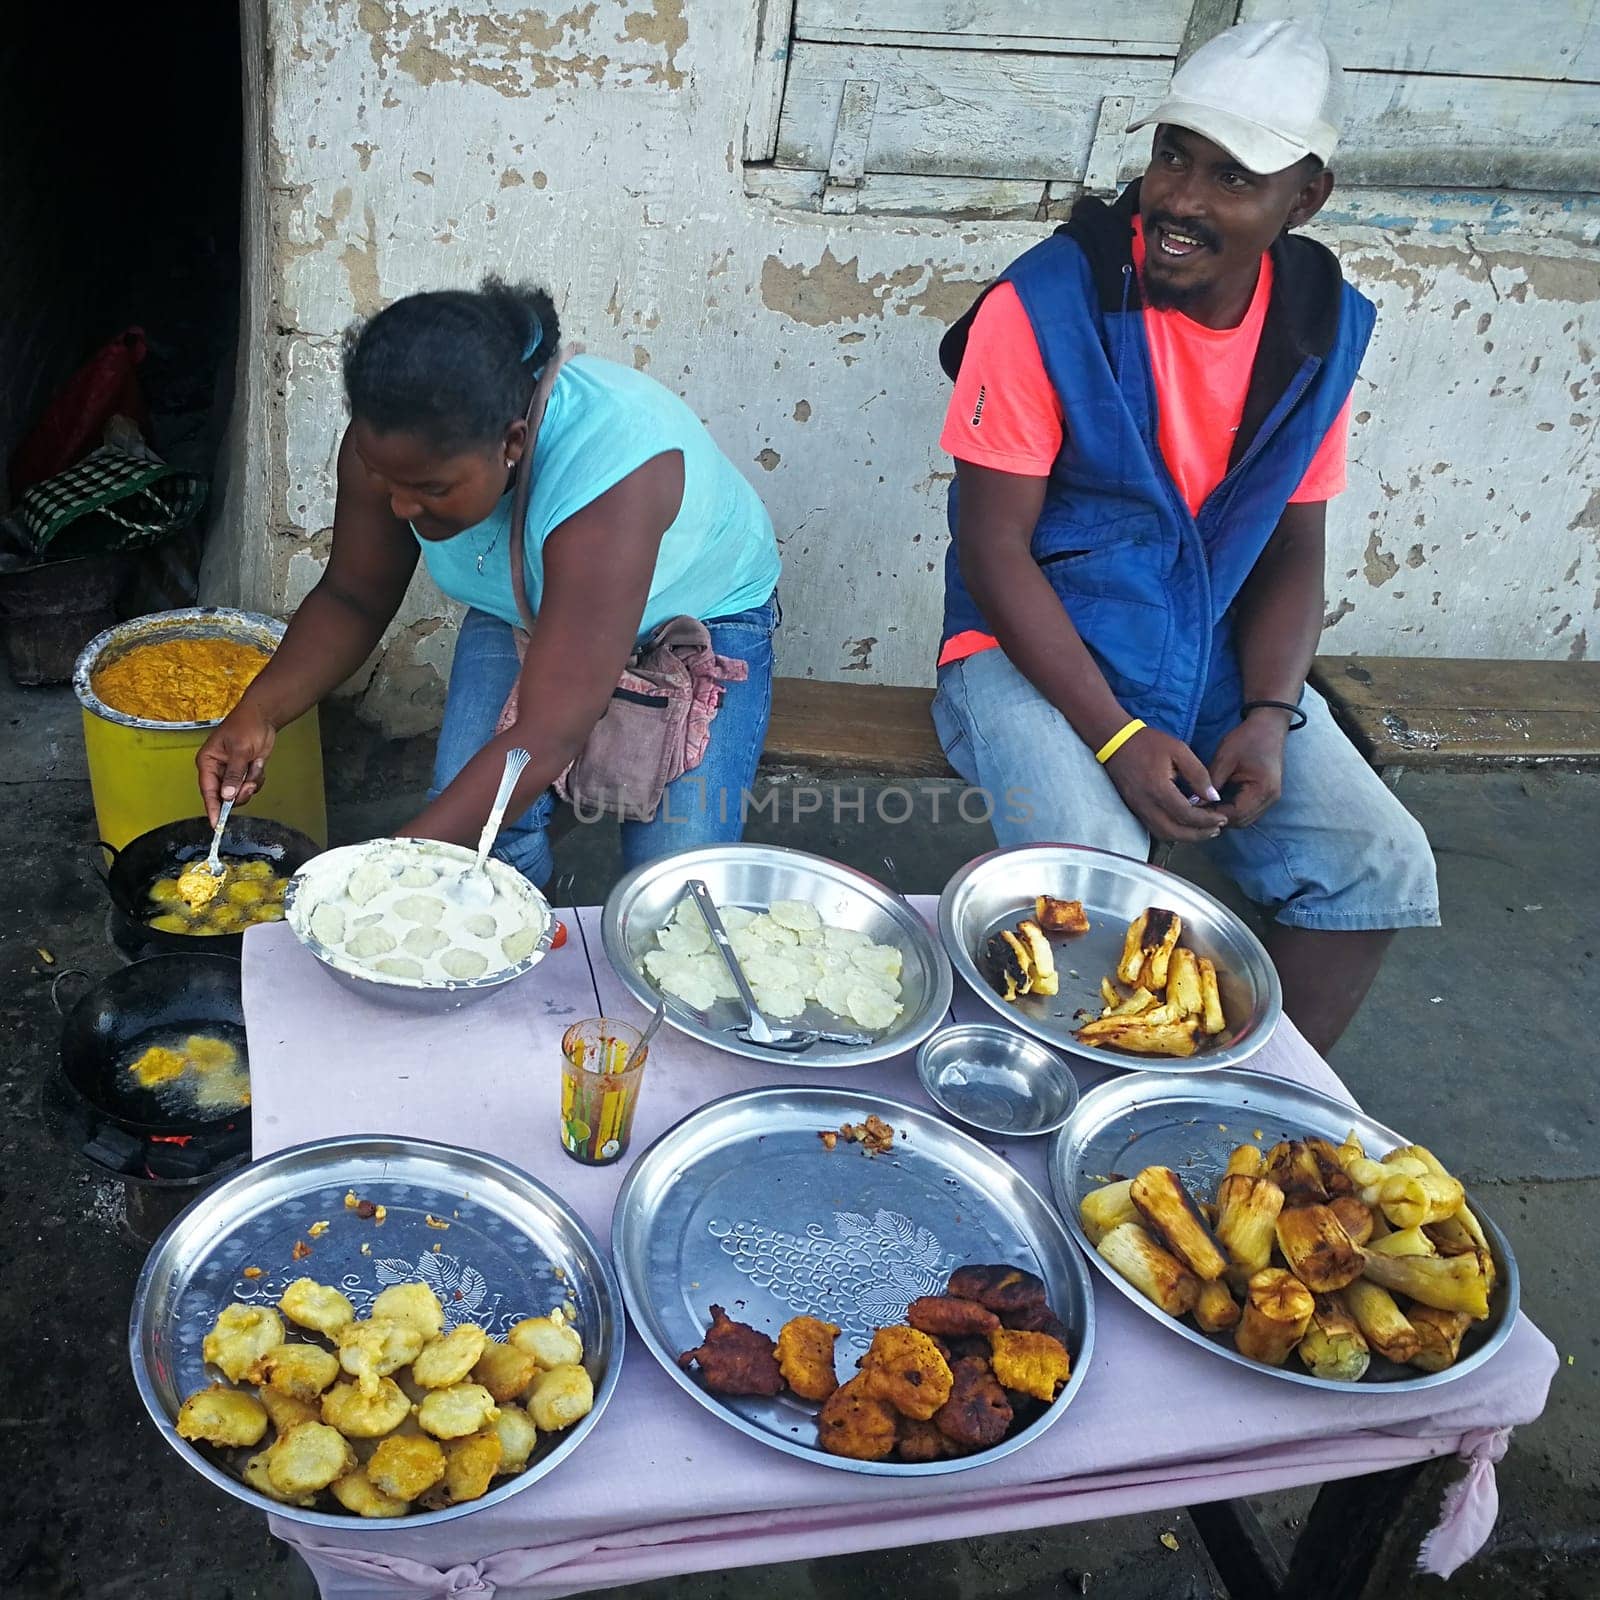 Ranohira, Madagascar - April 29, 2019: Unknown Malagasy woman cooks on the street, deep frying various coated vegetables, another man sits next to her on wooden bench. Food is often cooked at streets